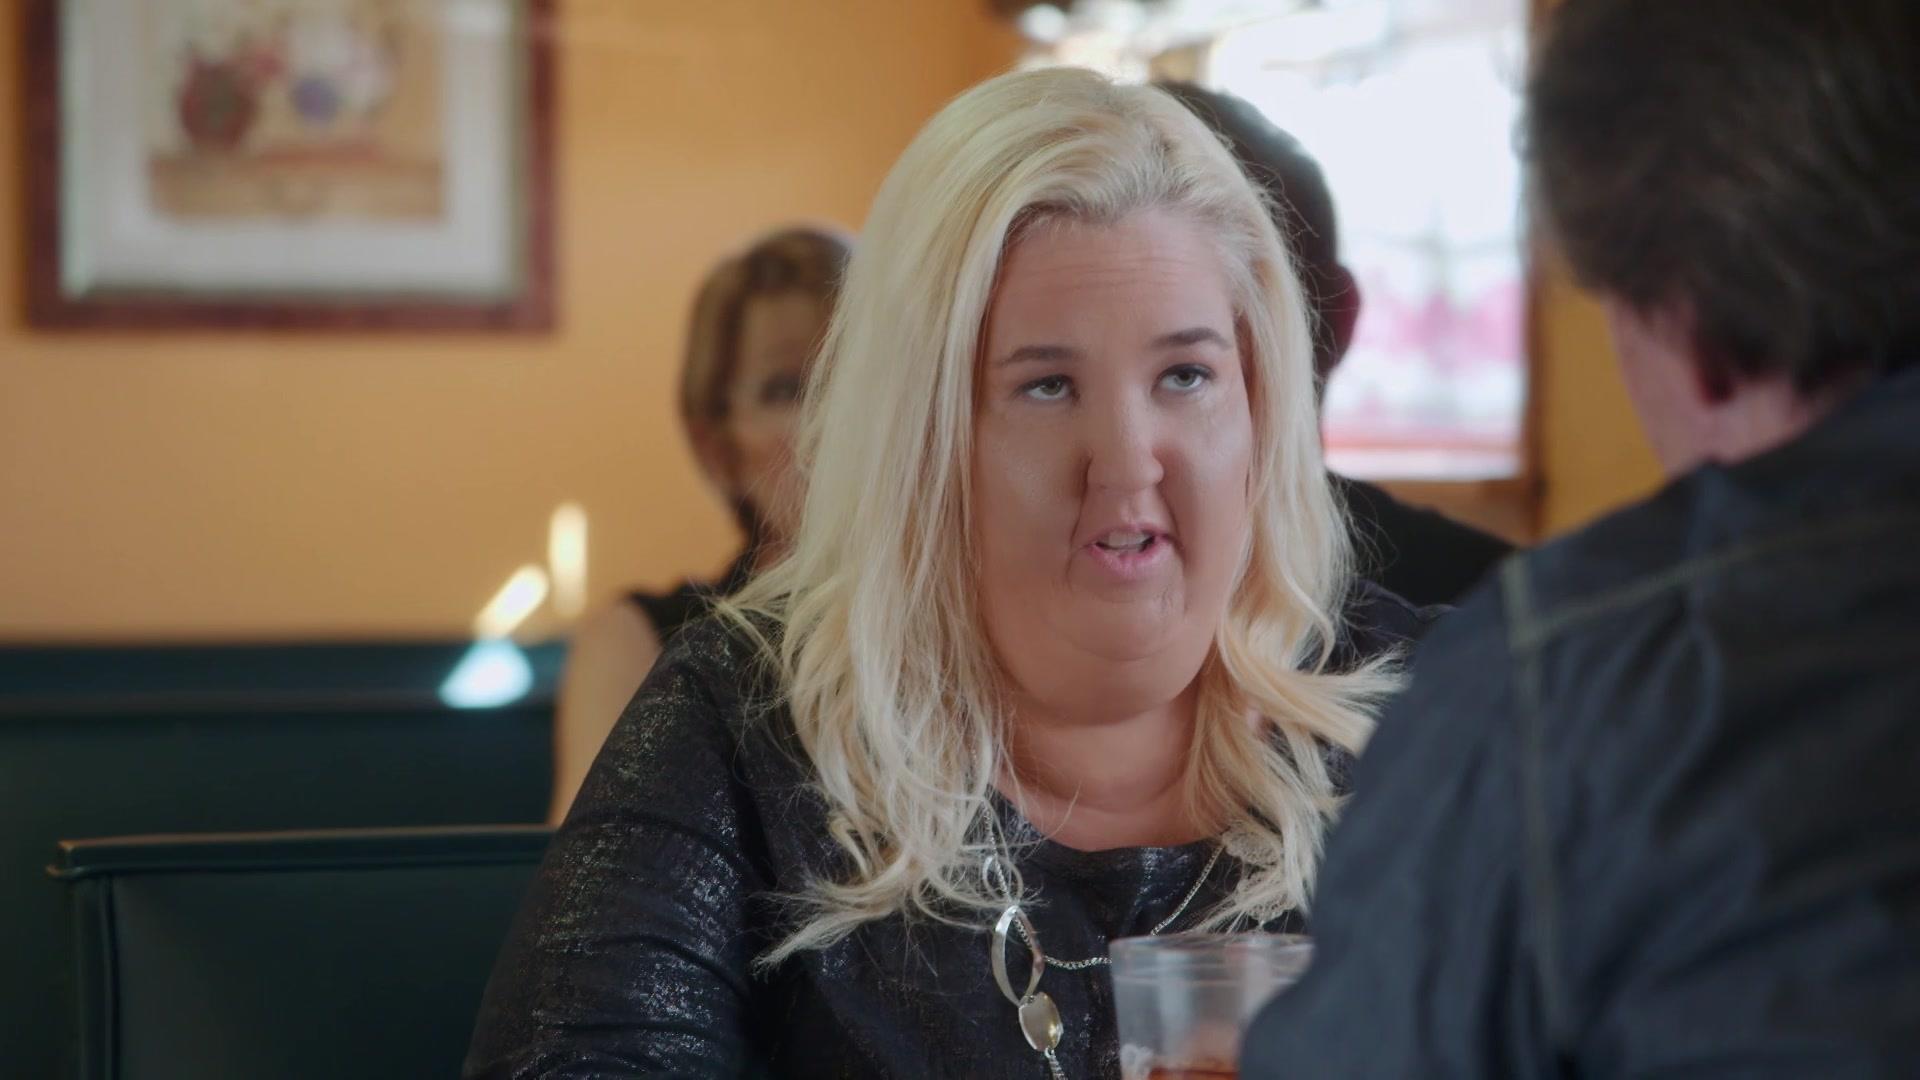 Mama June’s Love Interest Gets Her In Trouble With The Law Daily Worthing